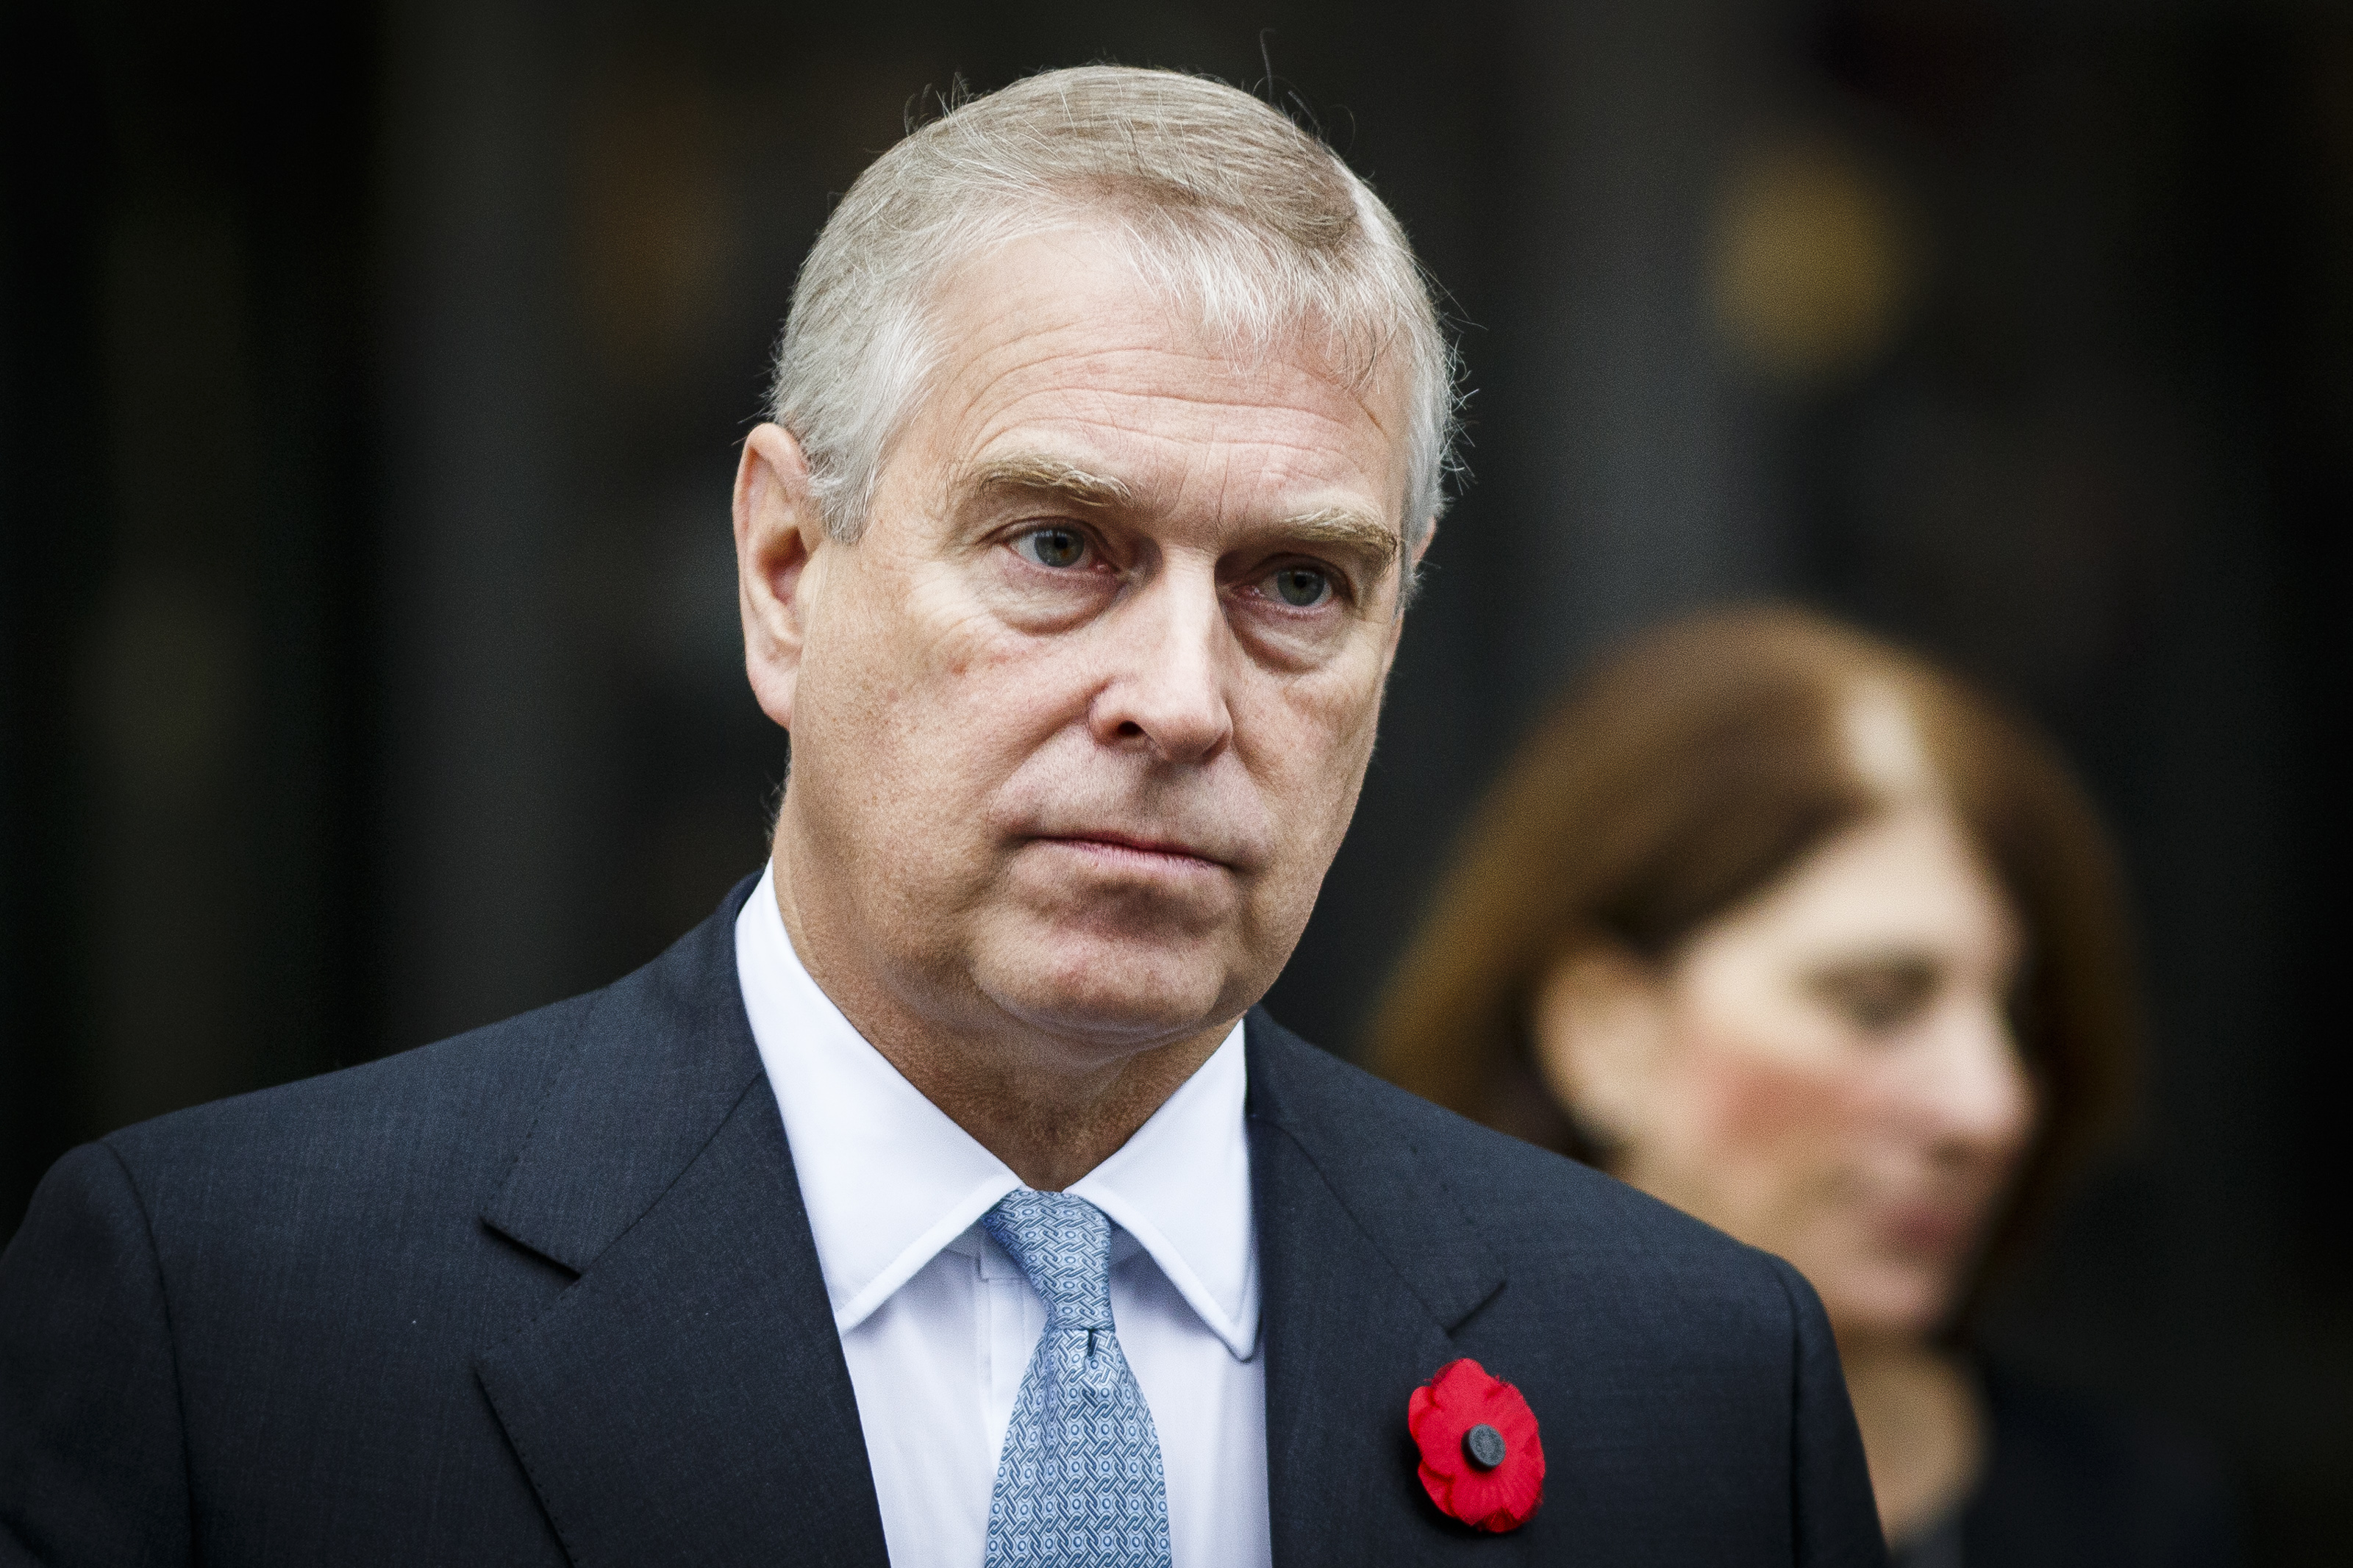 Former Royal Cop Says He Would Have ‘Knocked Prince Andrew Out’ Over Ridiculous Demands